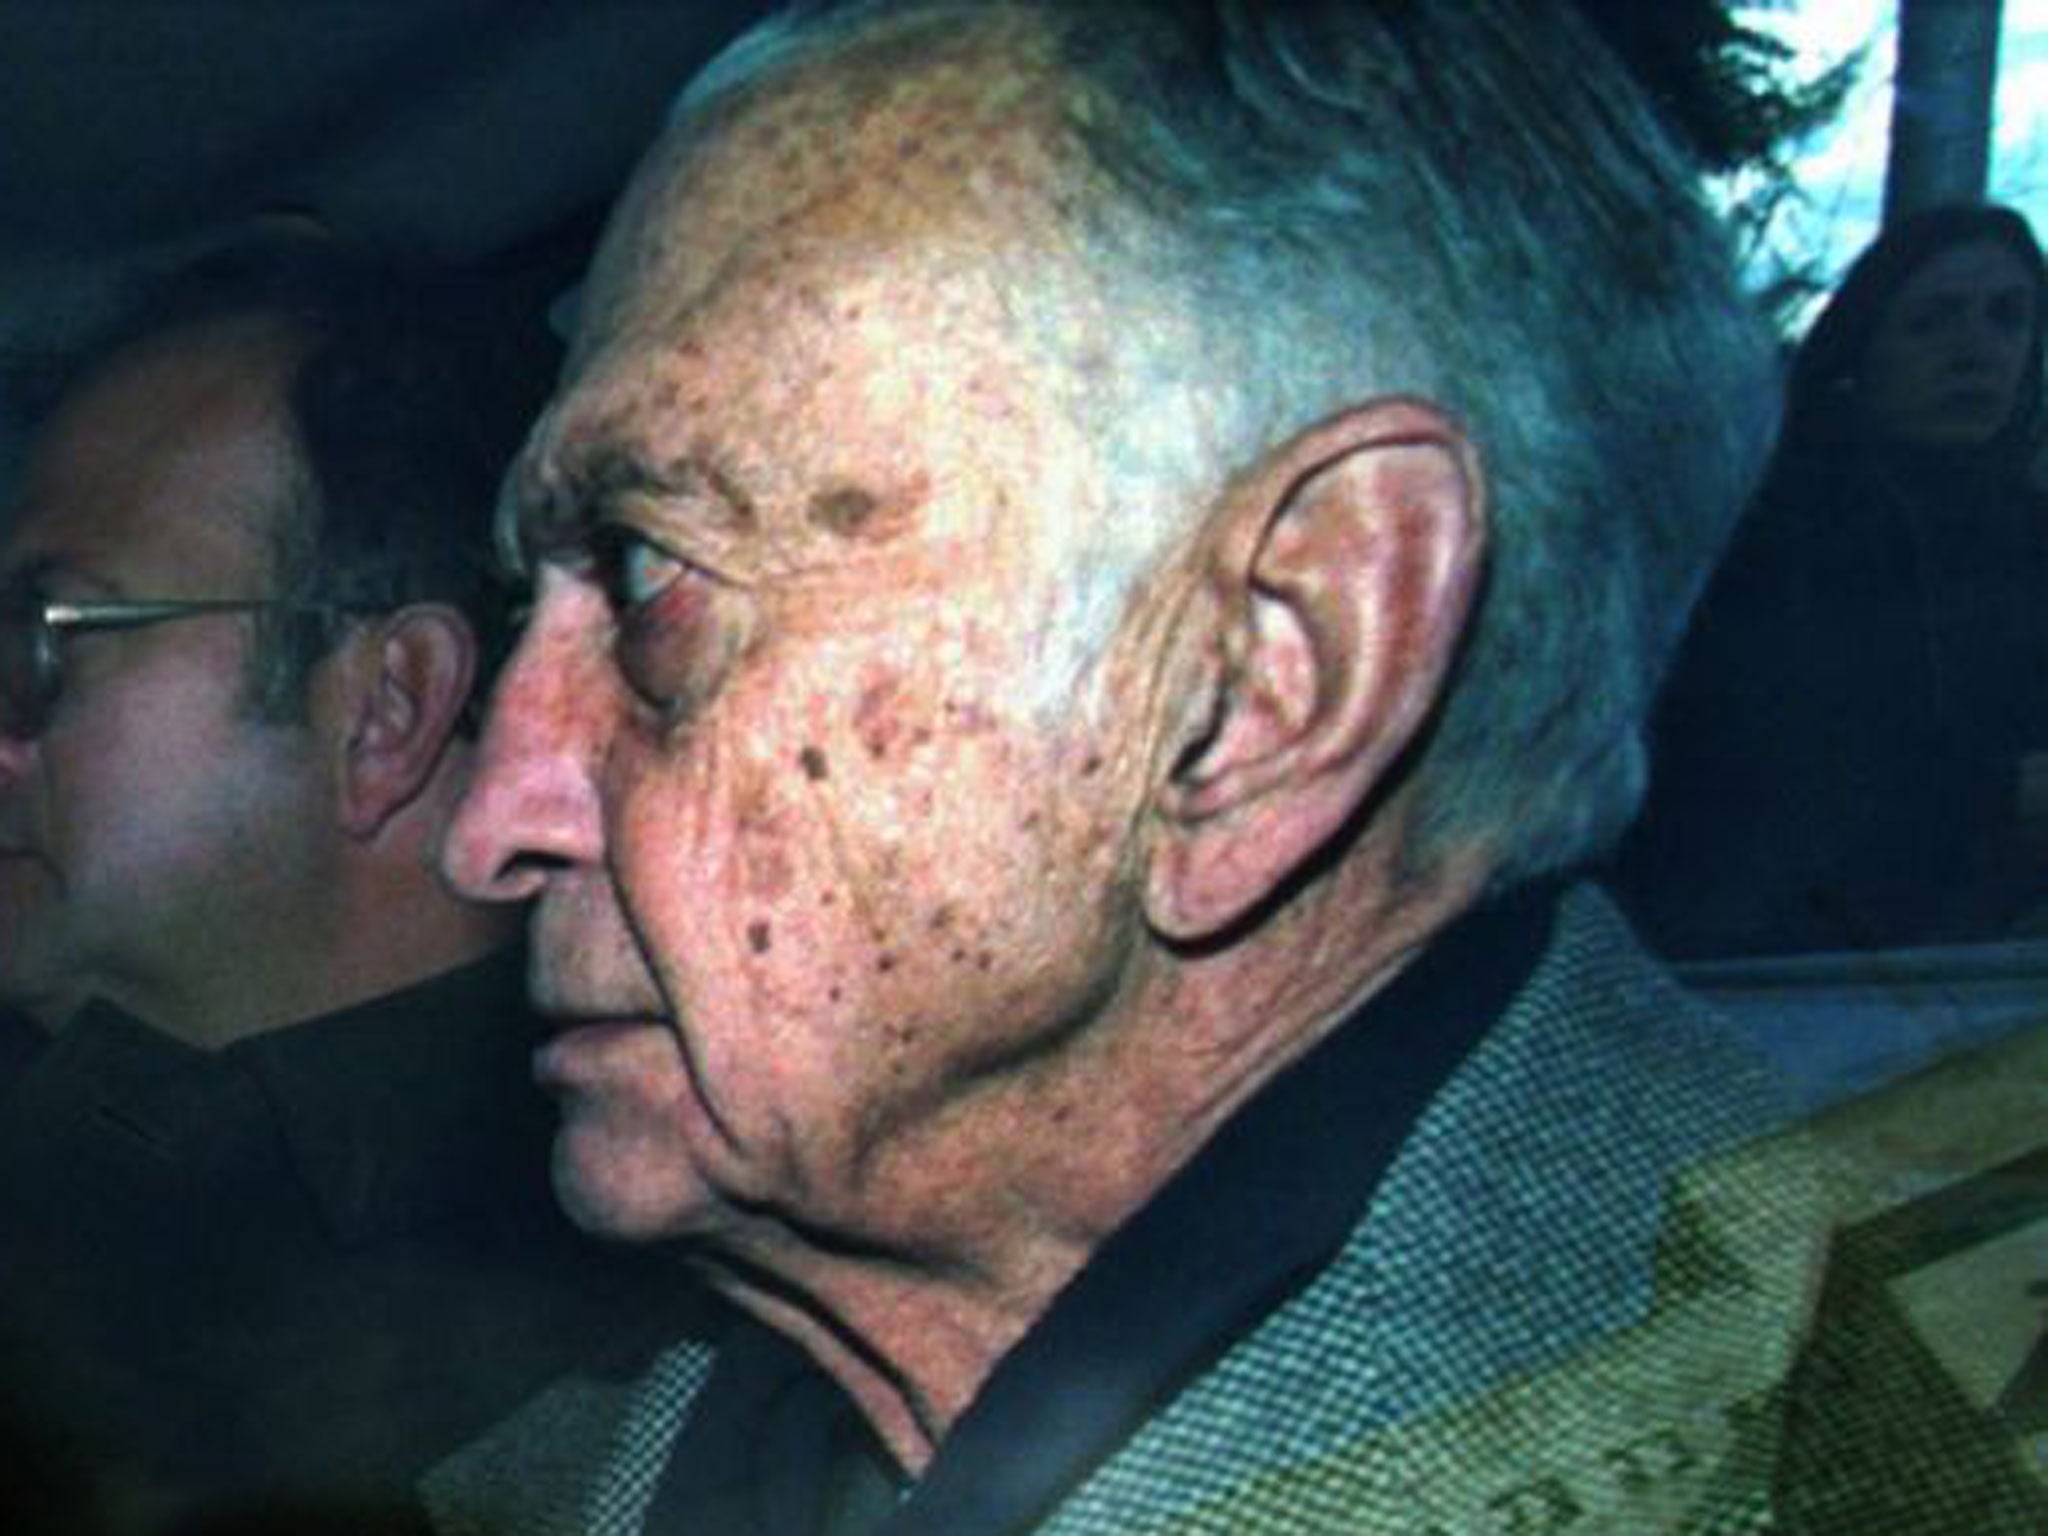 Jose Alfredo Martinez de Hoz, who died on 16 March at the age of 87, was a politician during the most brutal years of Argentina’s “dirty war” dictatorship